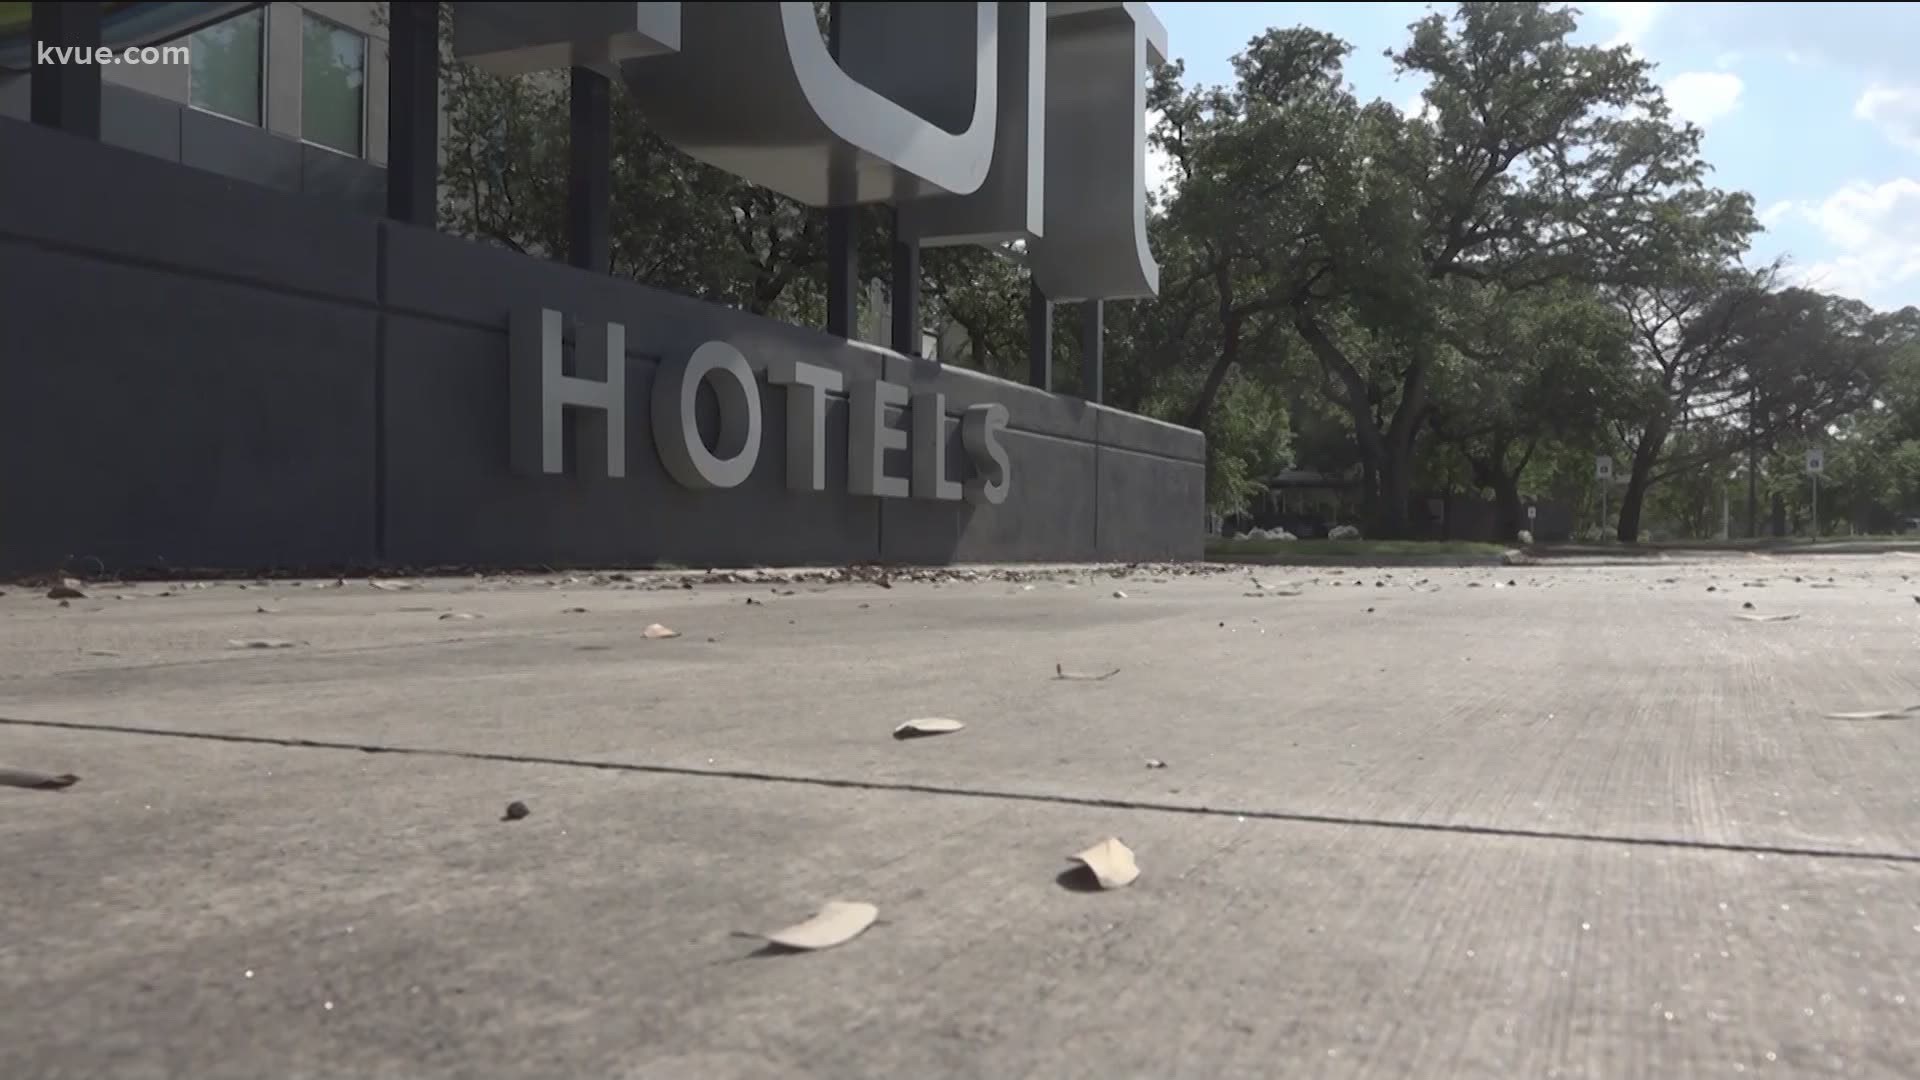 The number of people staying in Austin hotel rooms is still low, but it is growing.